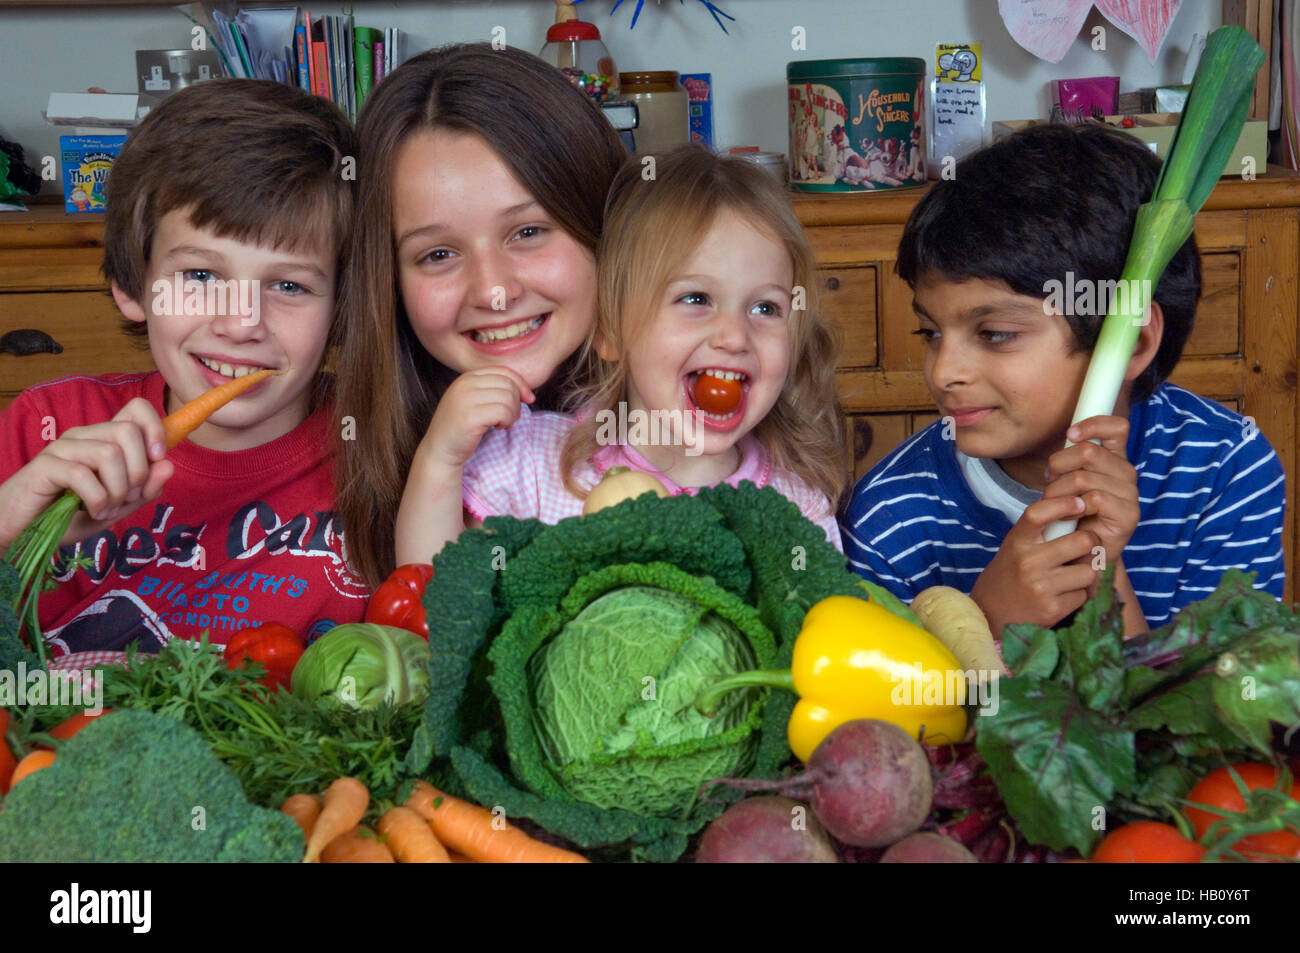 Children (2 boys and 2 girls) with a selection of healthy raw vegetables. a UK Stock Photo